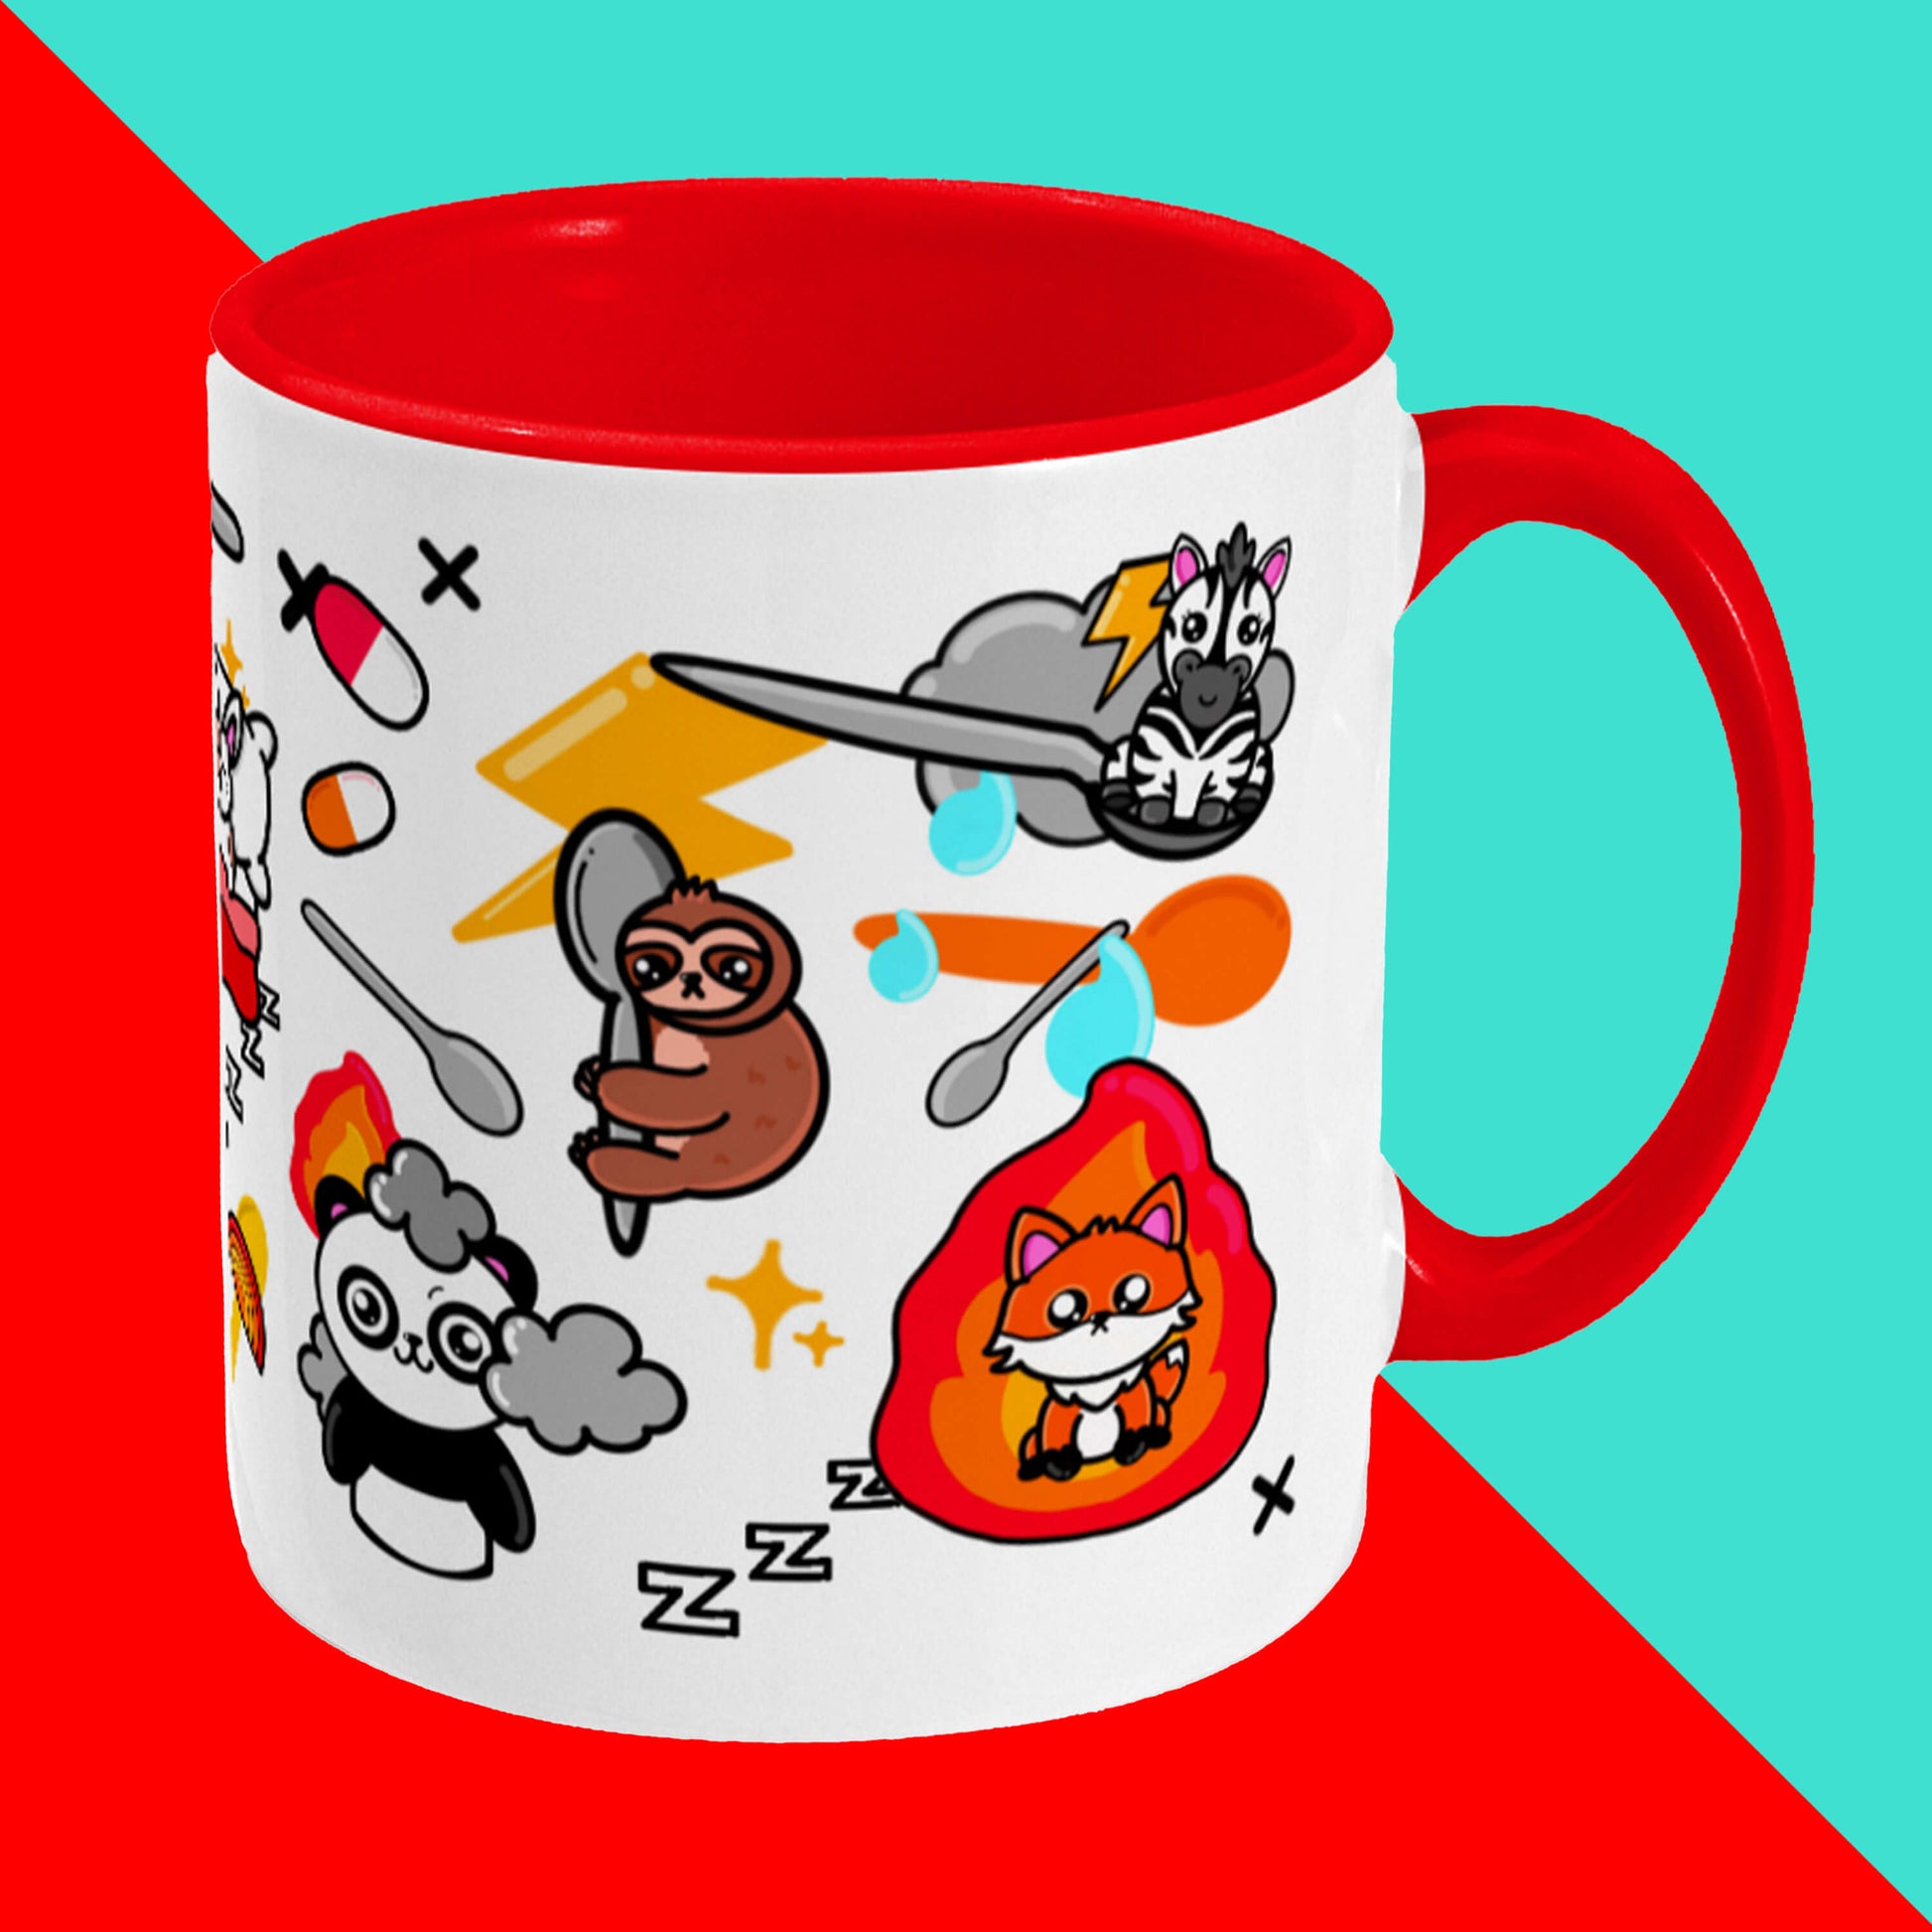 Spoonie Pattern Mug on a red and blue background. The white mug has a red handle and inside with various Innabox character illustrations on it. The hand drawn design is made to raise awareness for chronic and invisible illnesses